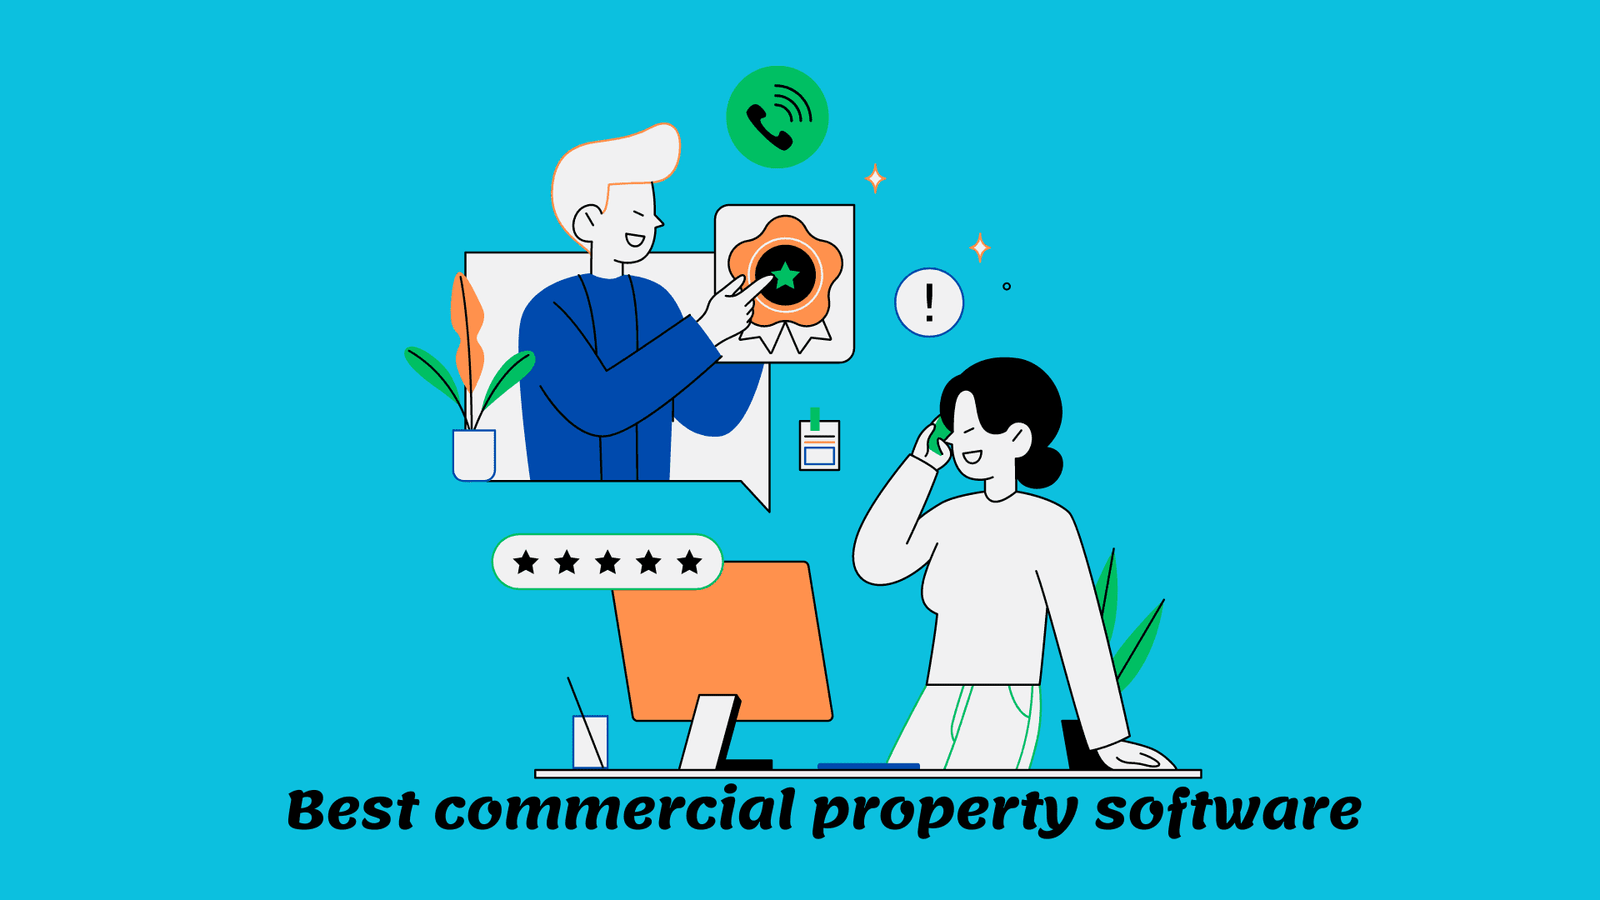 5 Best commercial property software on Highest Rated in 2023 Image